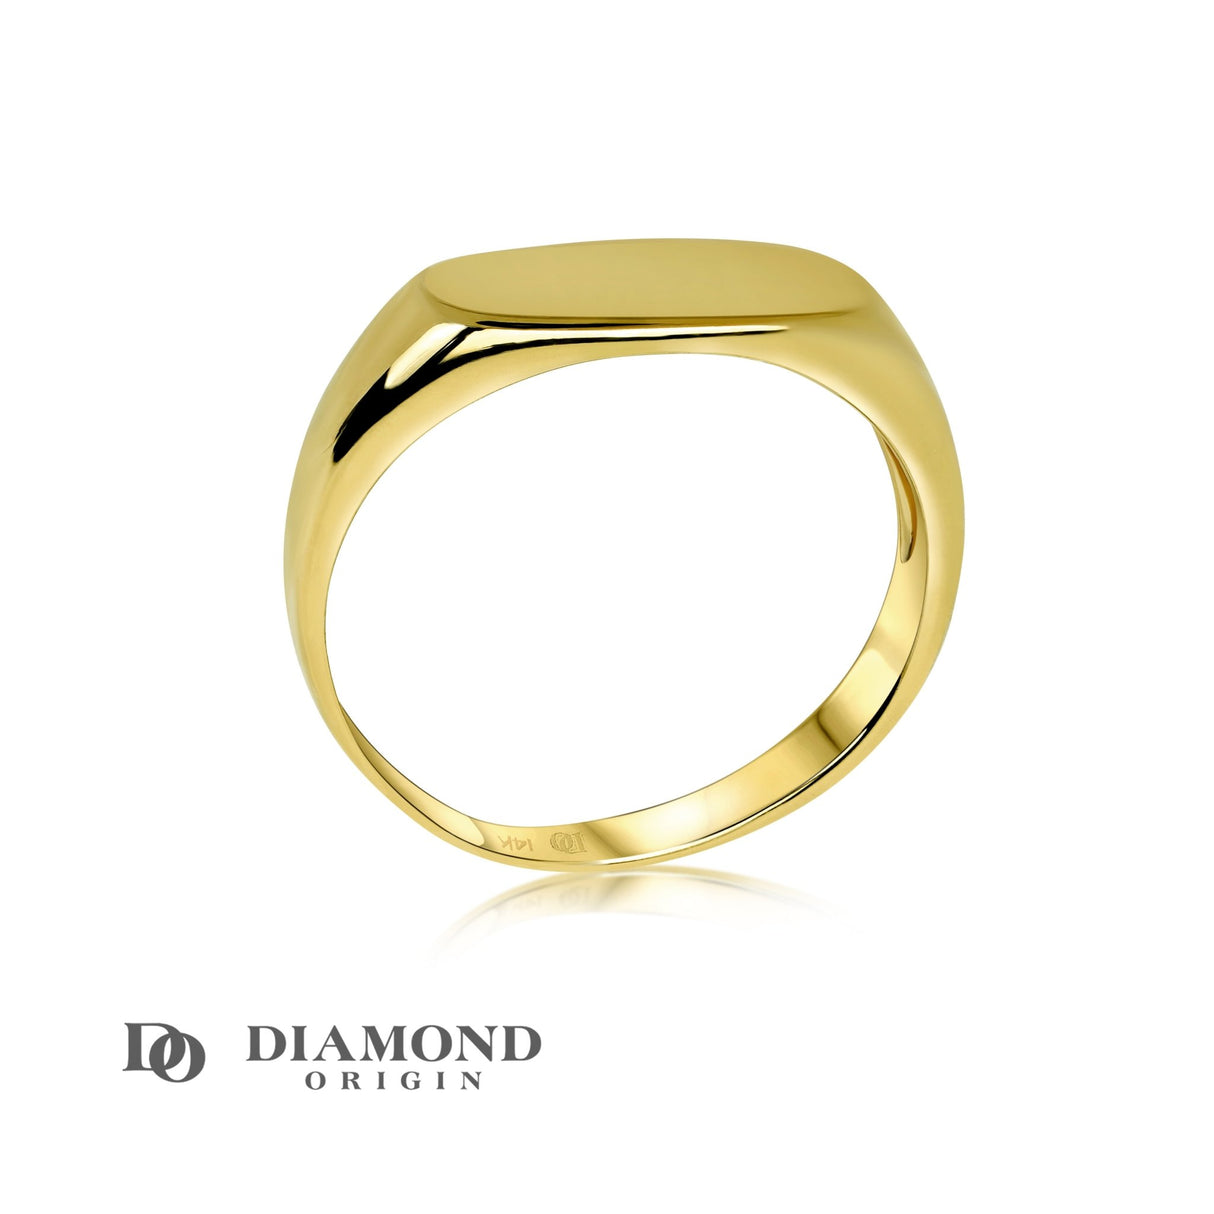 Like all Diamond Origin pieces, this ring bears the brand's distinctive mark, signifying its commitment to superior craftsmanship, ethical sourcing, and innovative design. Each ring is crafted with precision, ensuring that every detail, from the meticulously shaped signet to the quality of the gold, meets the highest standards, gold ring, gold rings, solid gold rings, 14K gold rings,